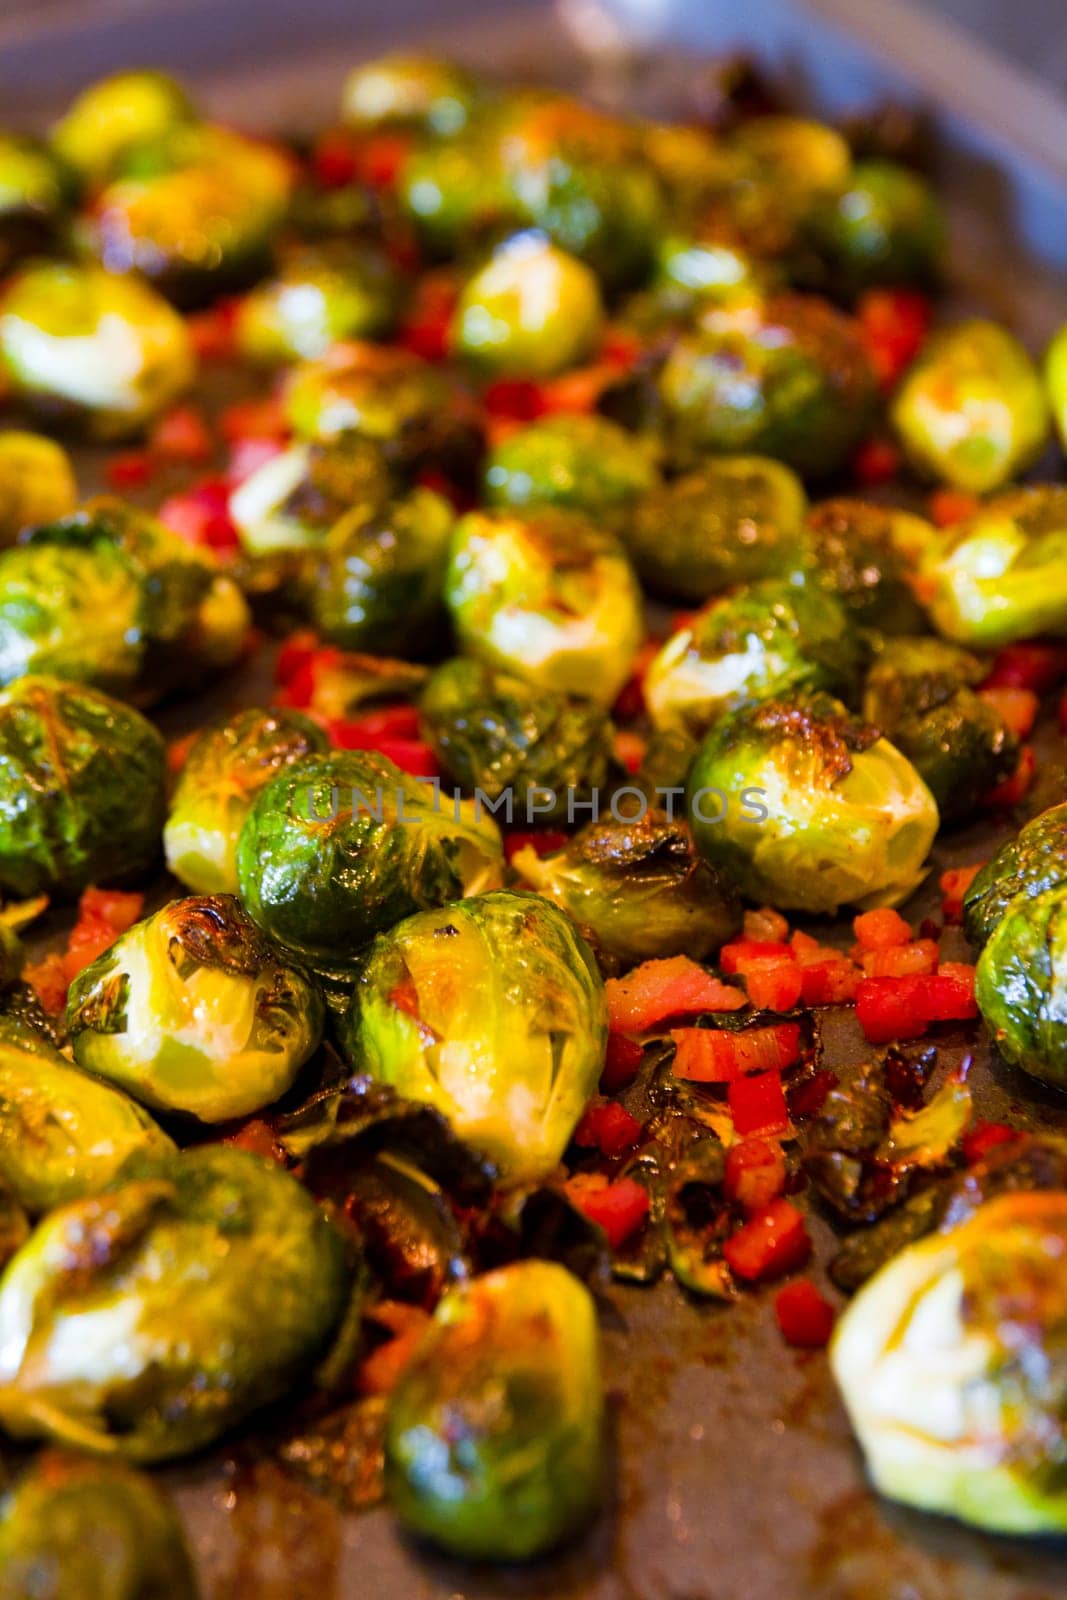 Roasted Brussels Sprouts and Red Bell Peppers in Warm Lighting Close-Up by njproductions